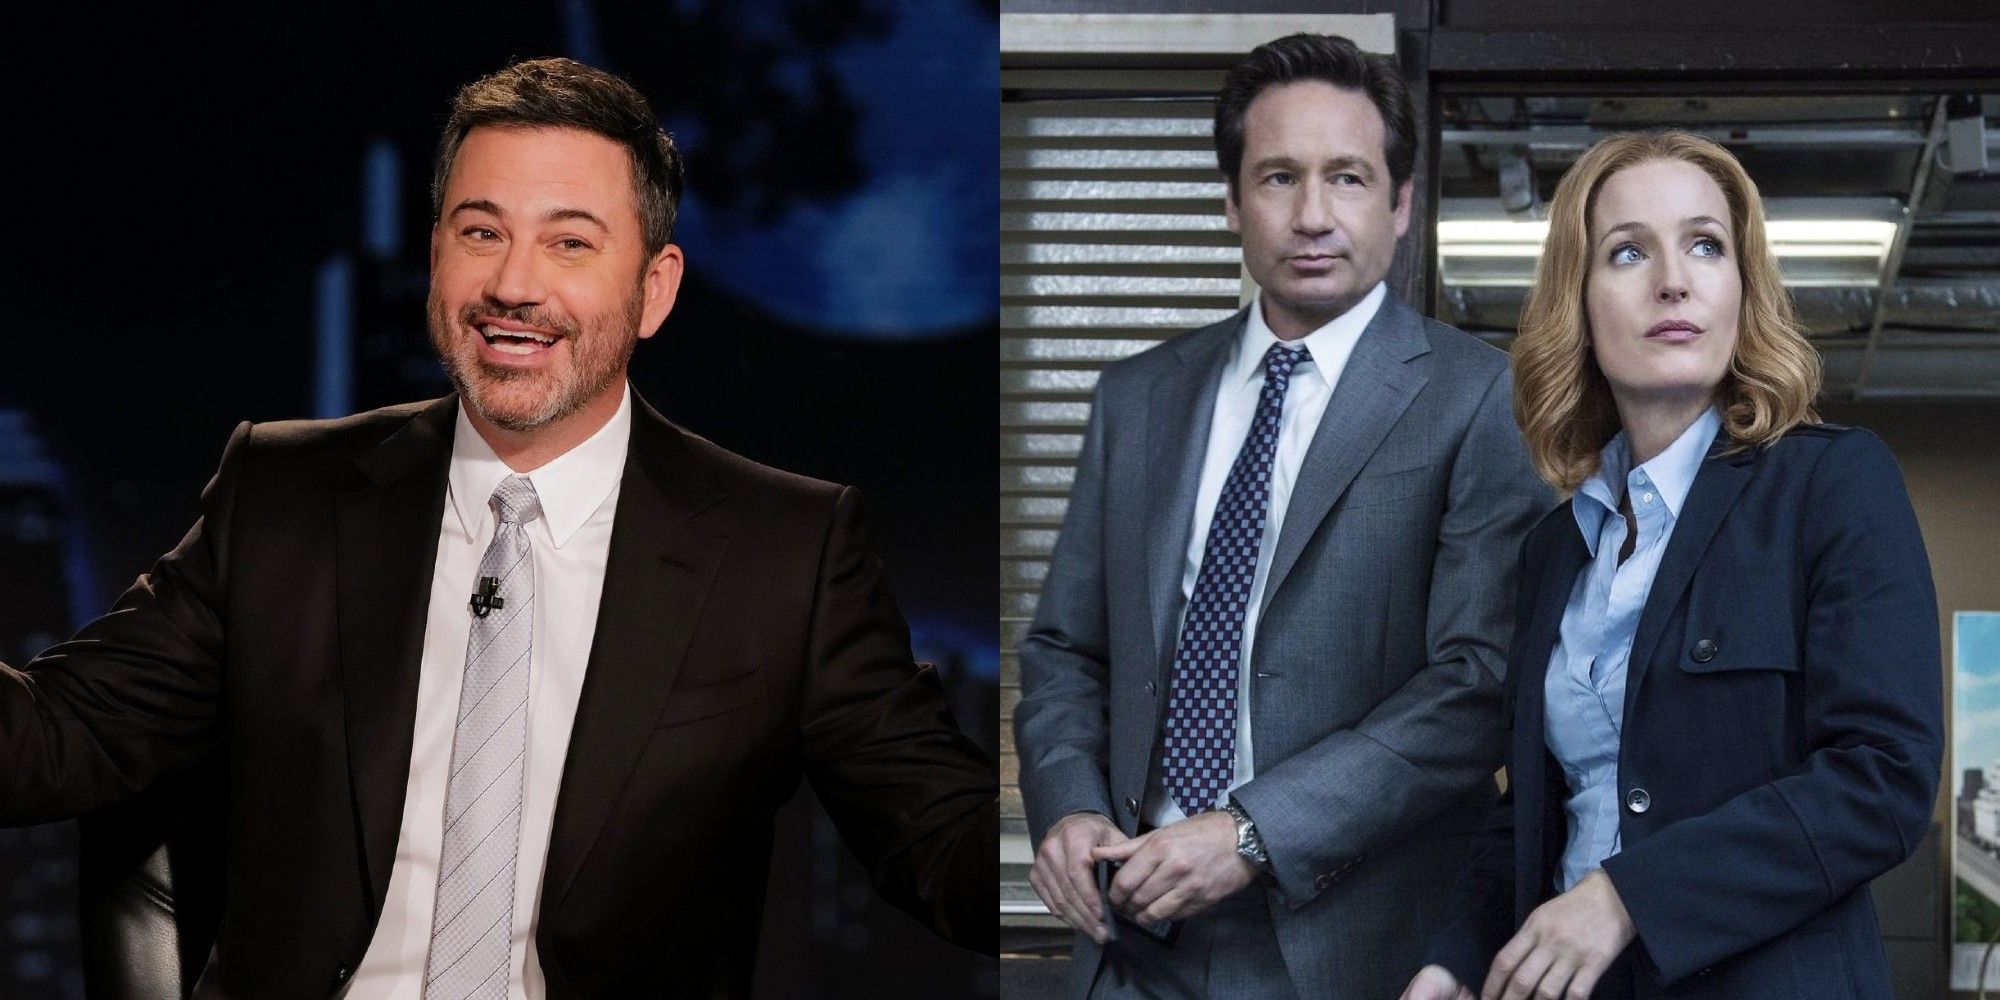 Jimmy Kimmel in Jimmy Kimmel Live; David Duchovny and Gillian Anderson in The X-Files